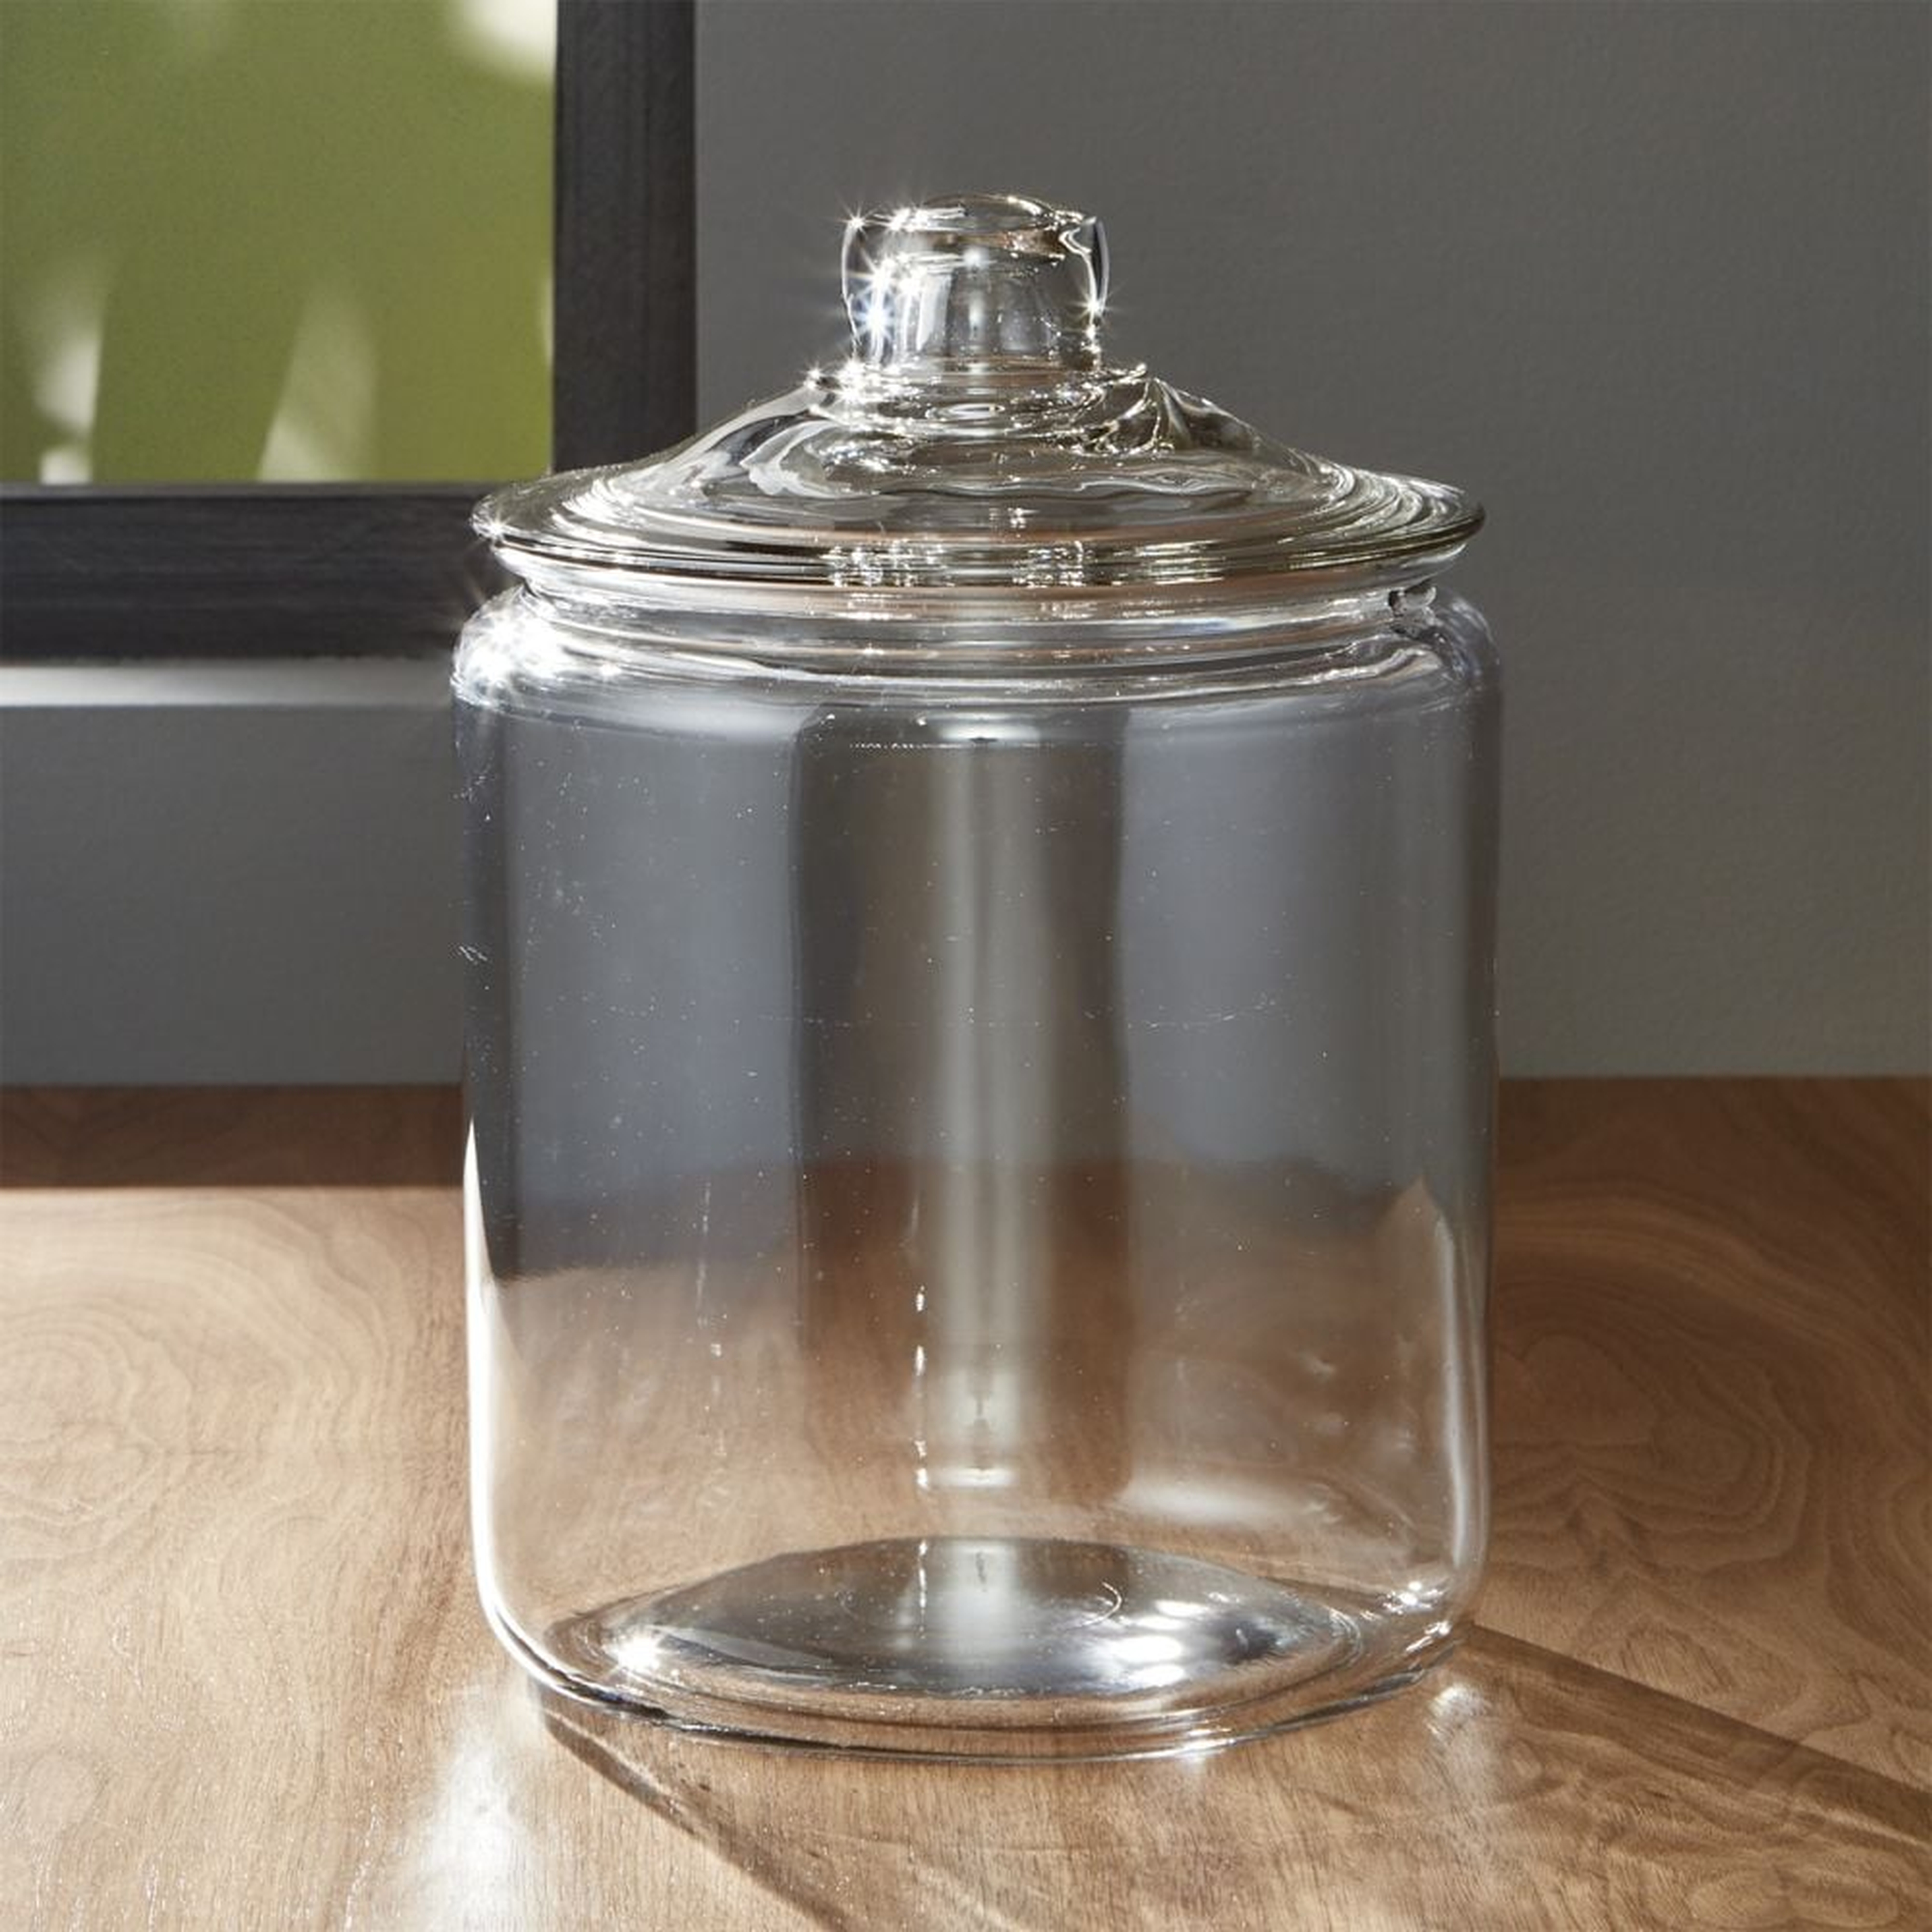 Heritage Hill 128-Oz. Large Glass Jar with Lid - Crate and Barrel